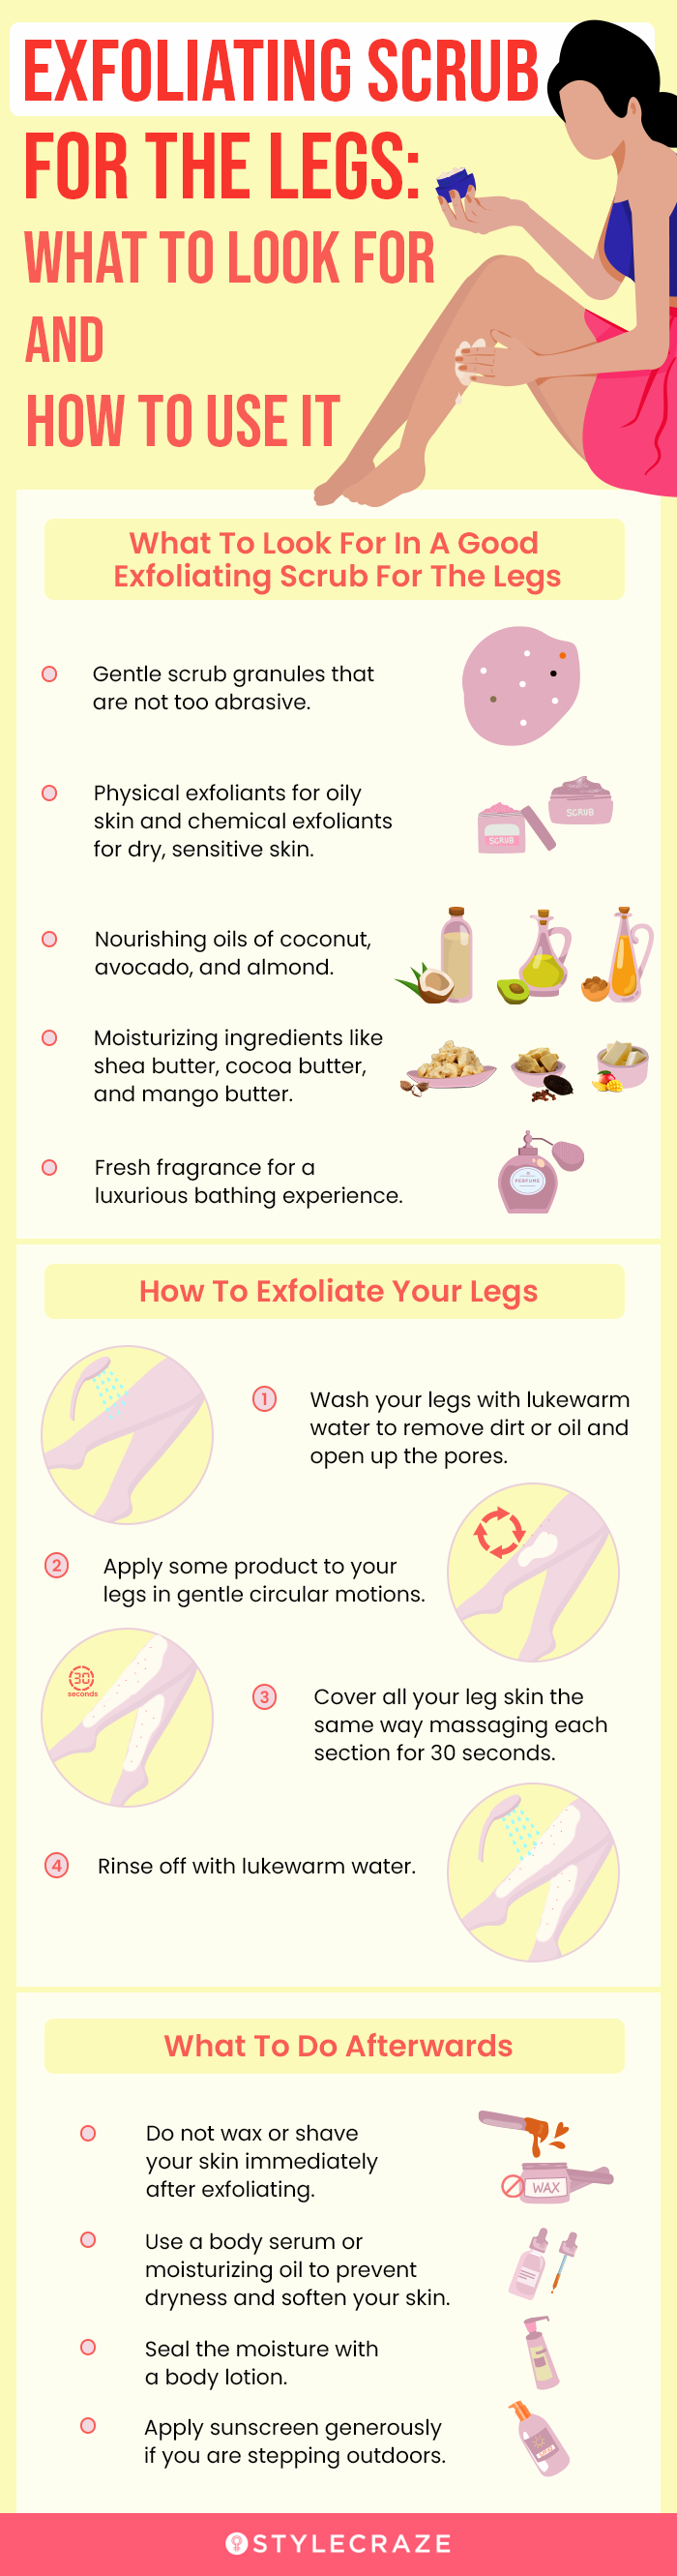 What Makes A Good Exfoliating Scrub For Legs And How To Use It